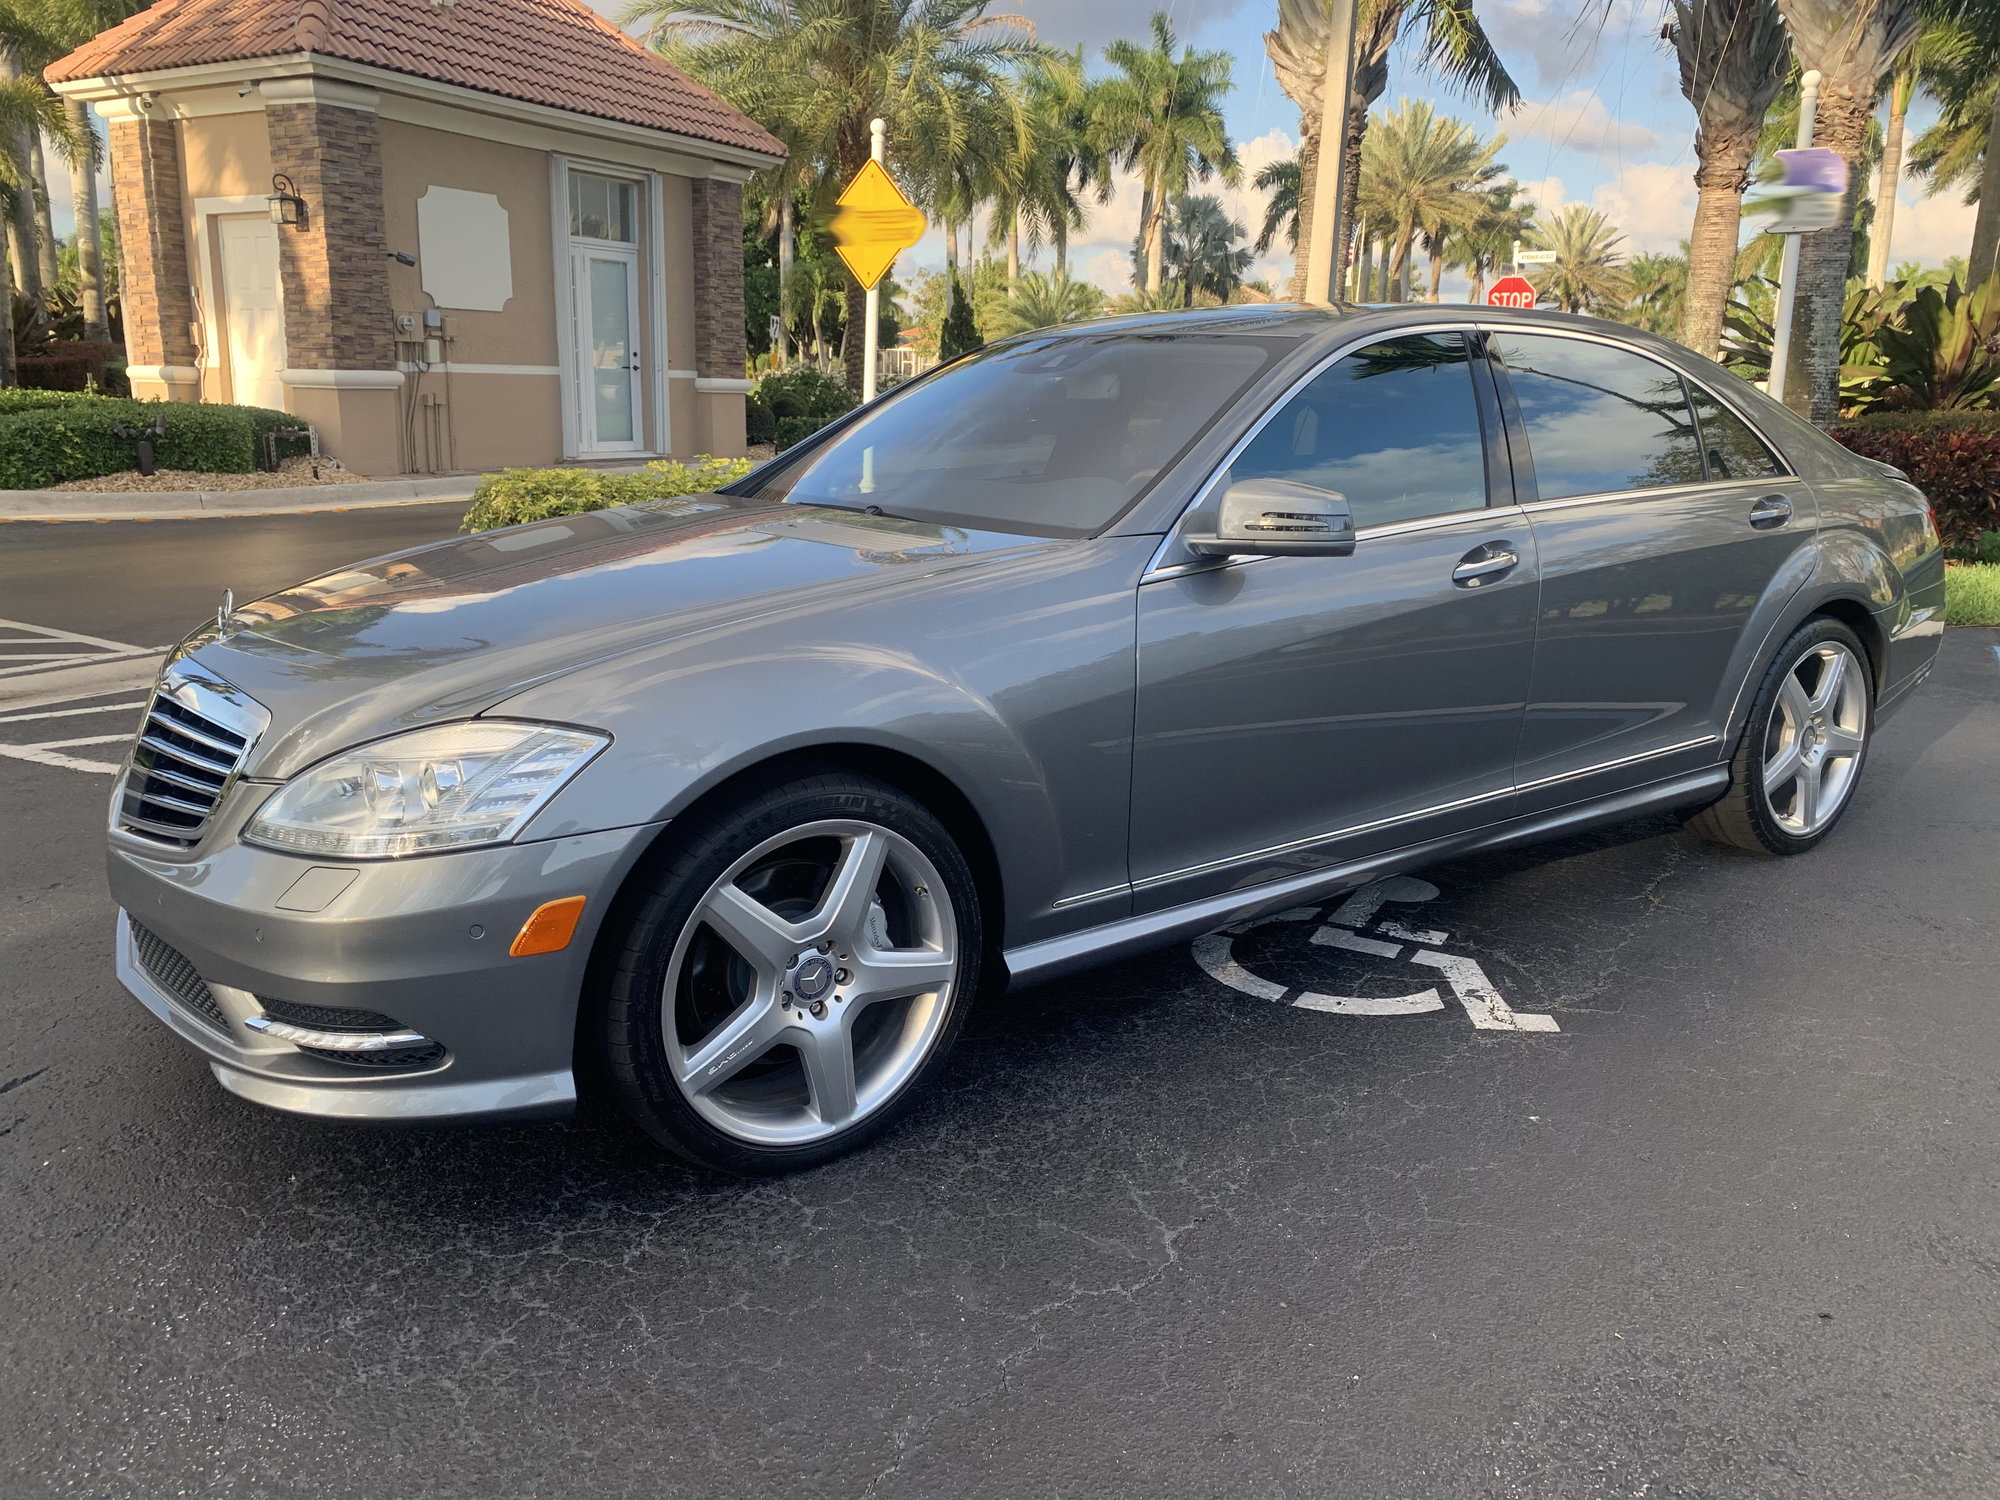 2012 Mercedes-Benz S550 - 2012 Mercedes Benz S550 AMG SPORT PKG - IMMACULATE! - Used - VIN WBA12312312312312 - 58,500 Miles - 8 cyl - 2WD - Automatic - Sedan - Gray - Broward Co, FL 33065, United States